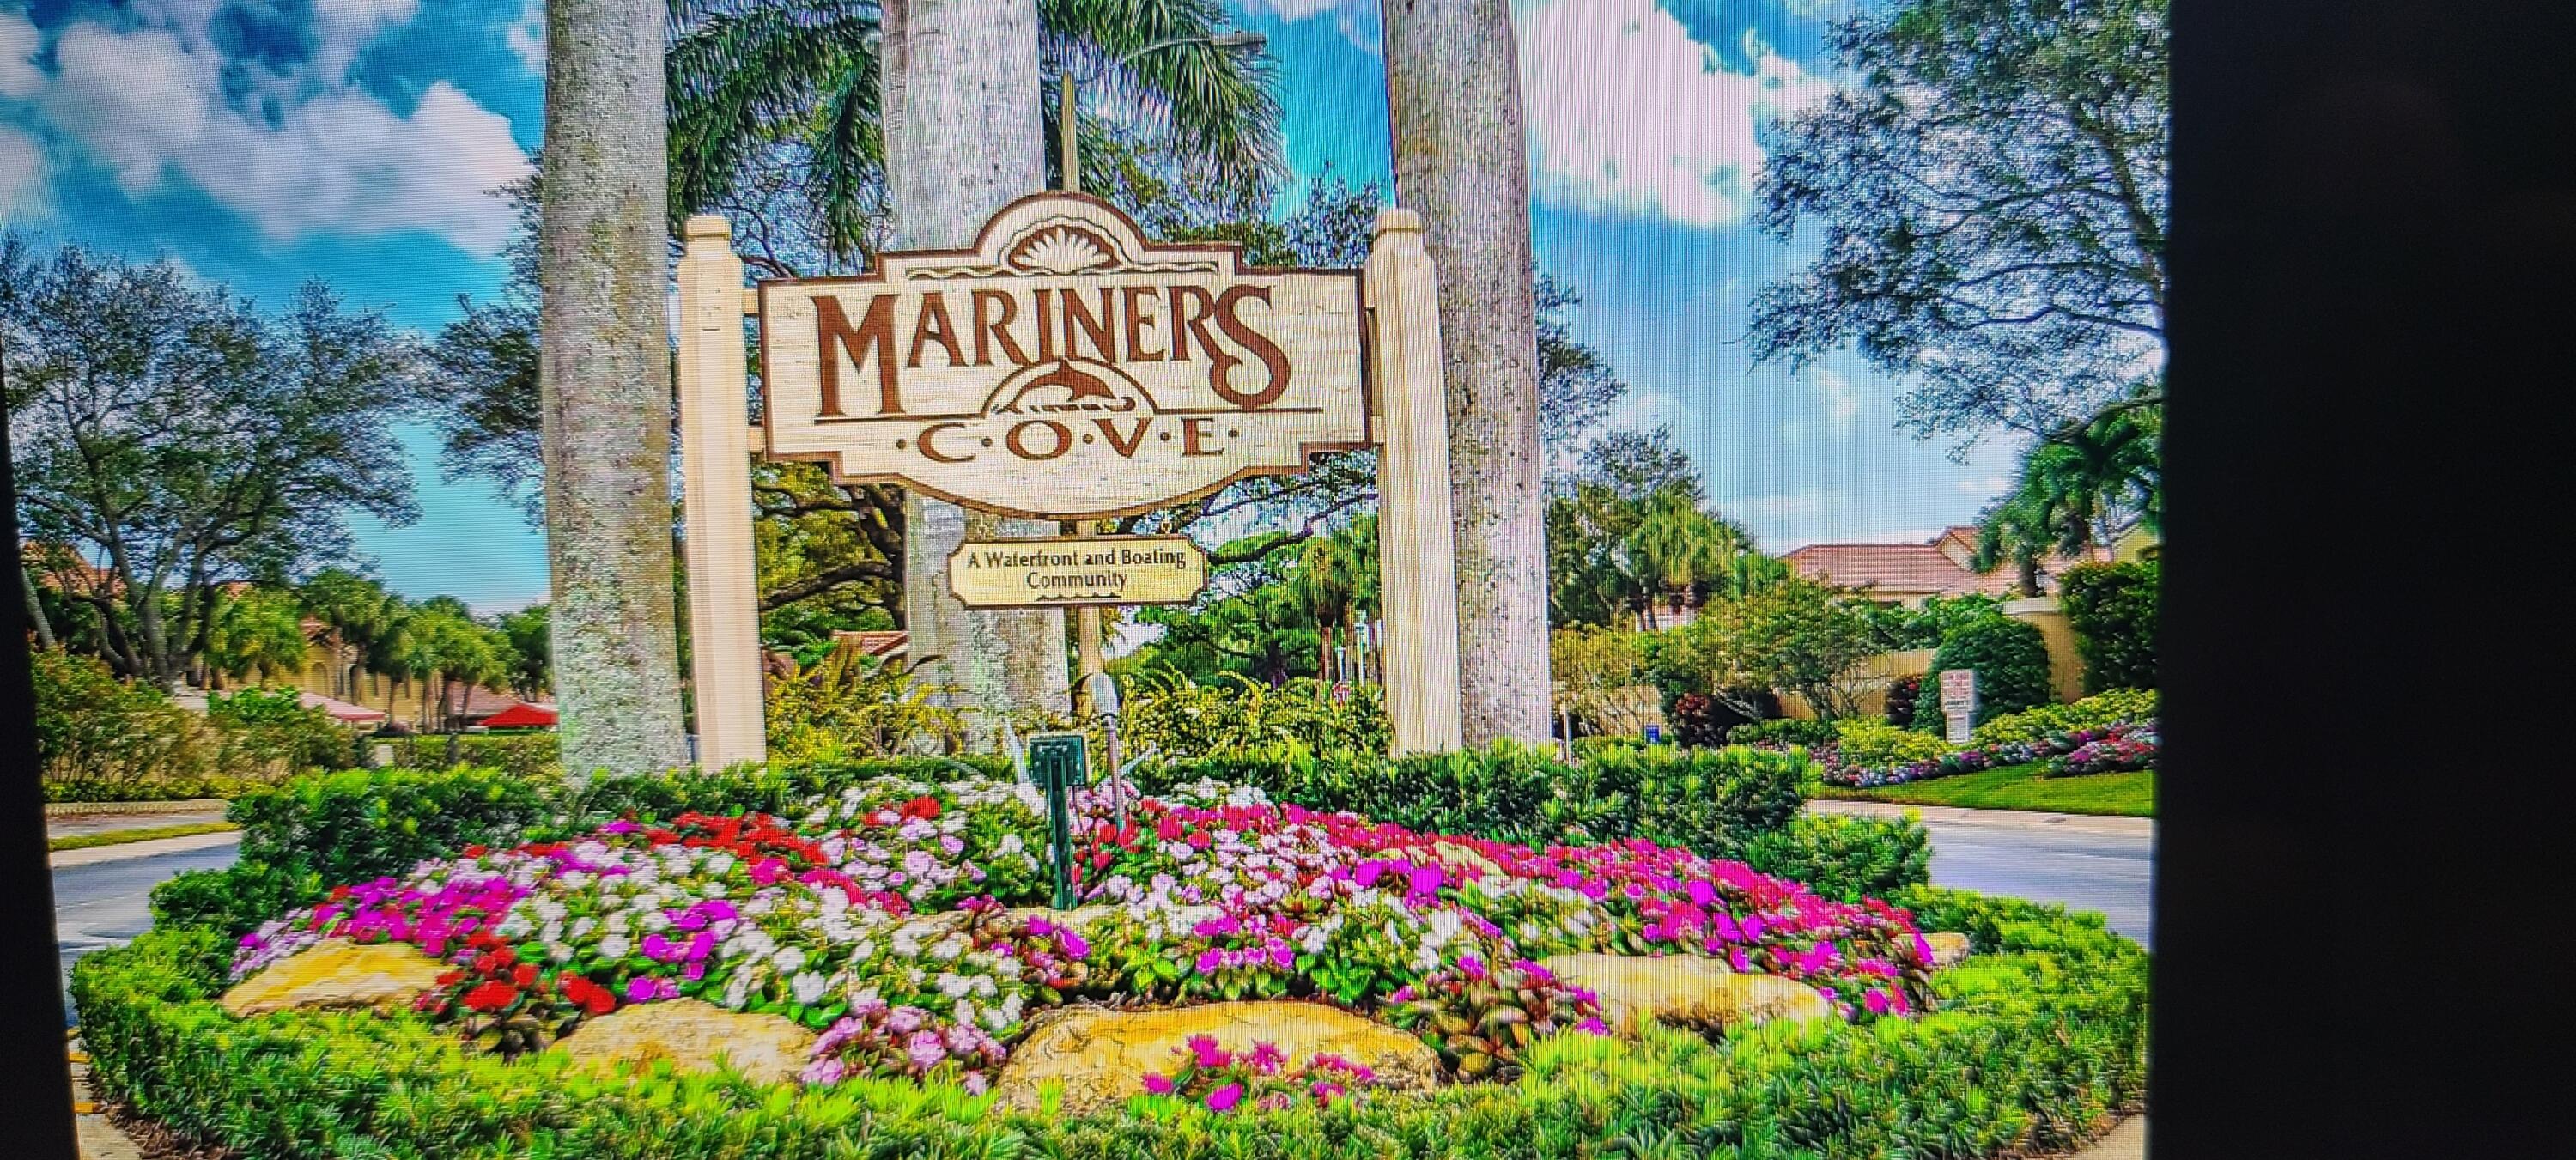 Entrance To Mariners Cove